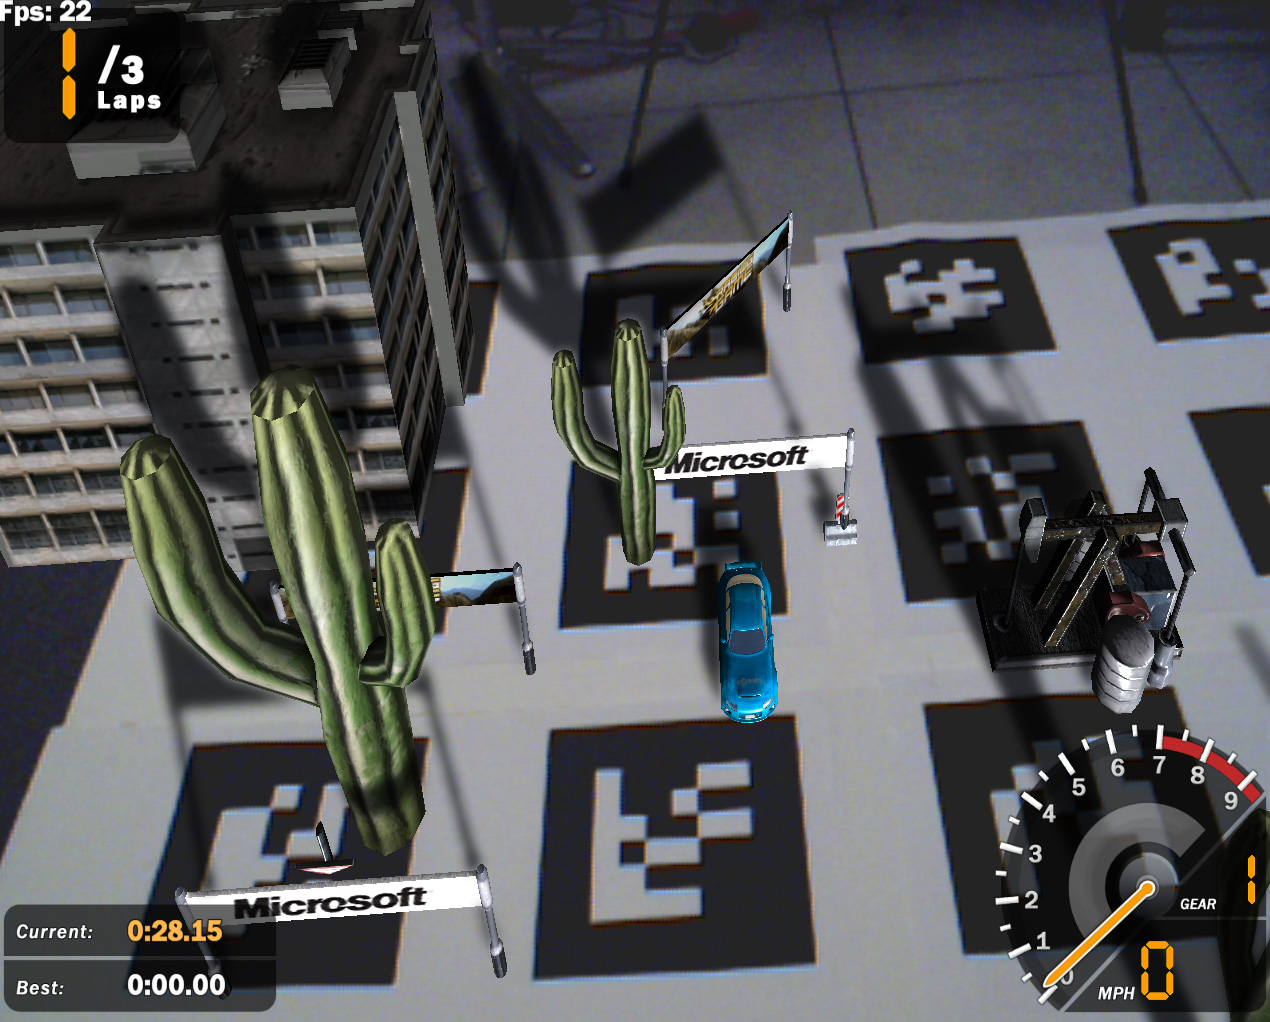 XNA AR Racing Game screenshot showing virtual objects on physical gameboard